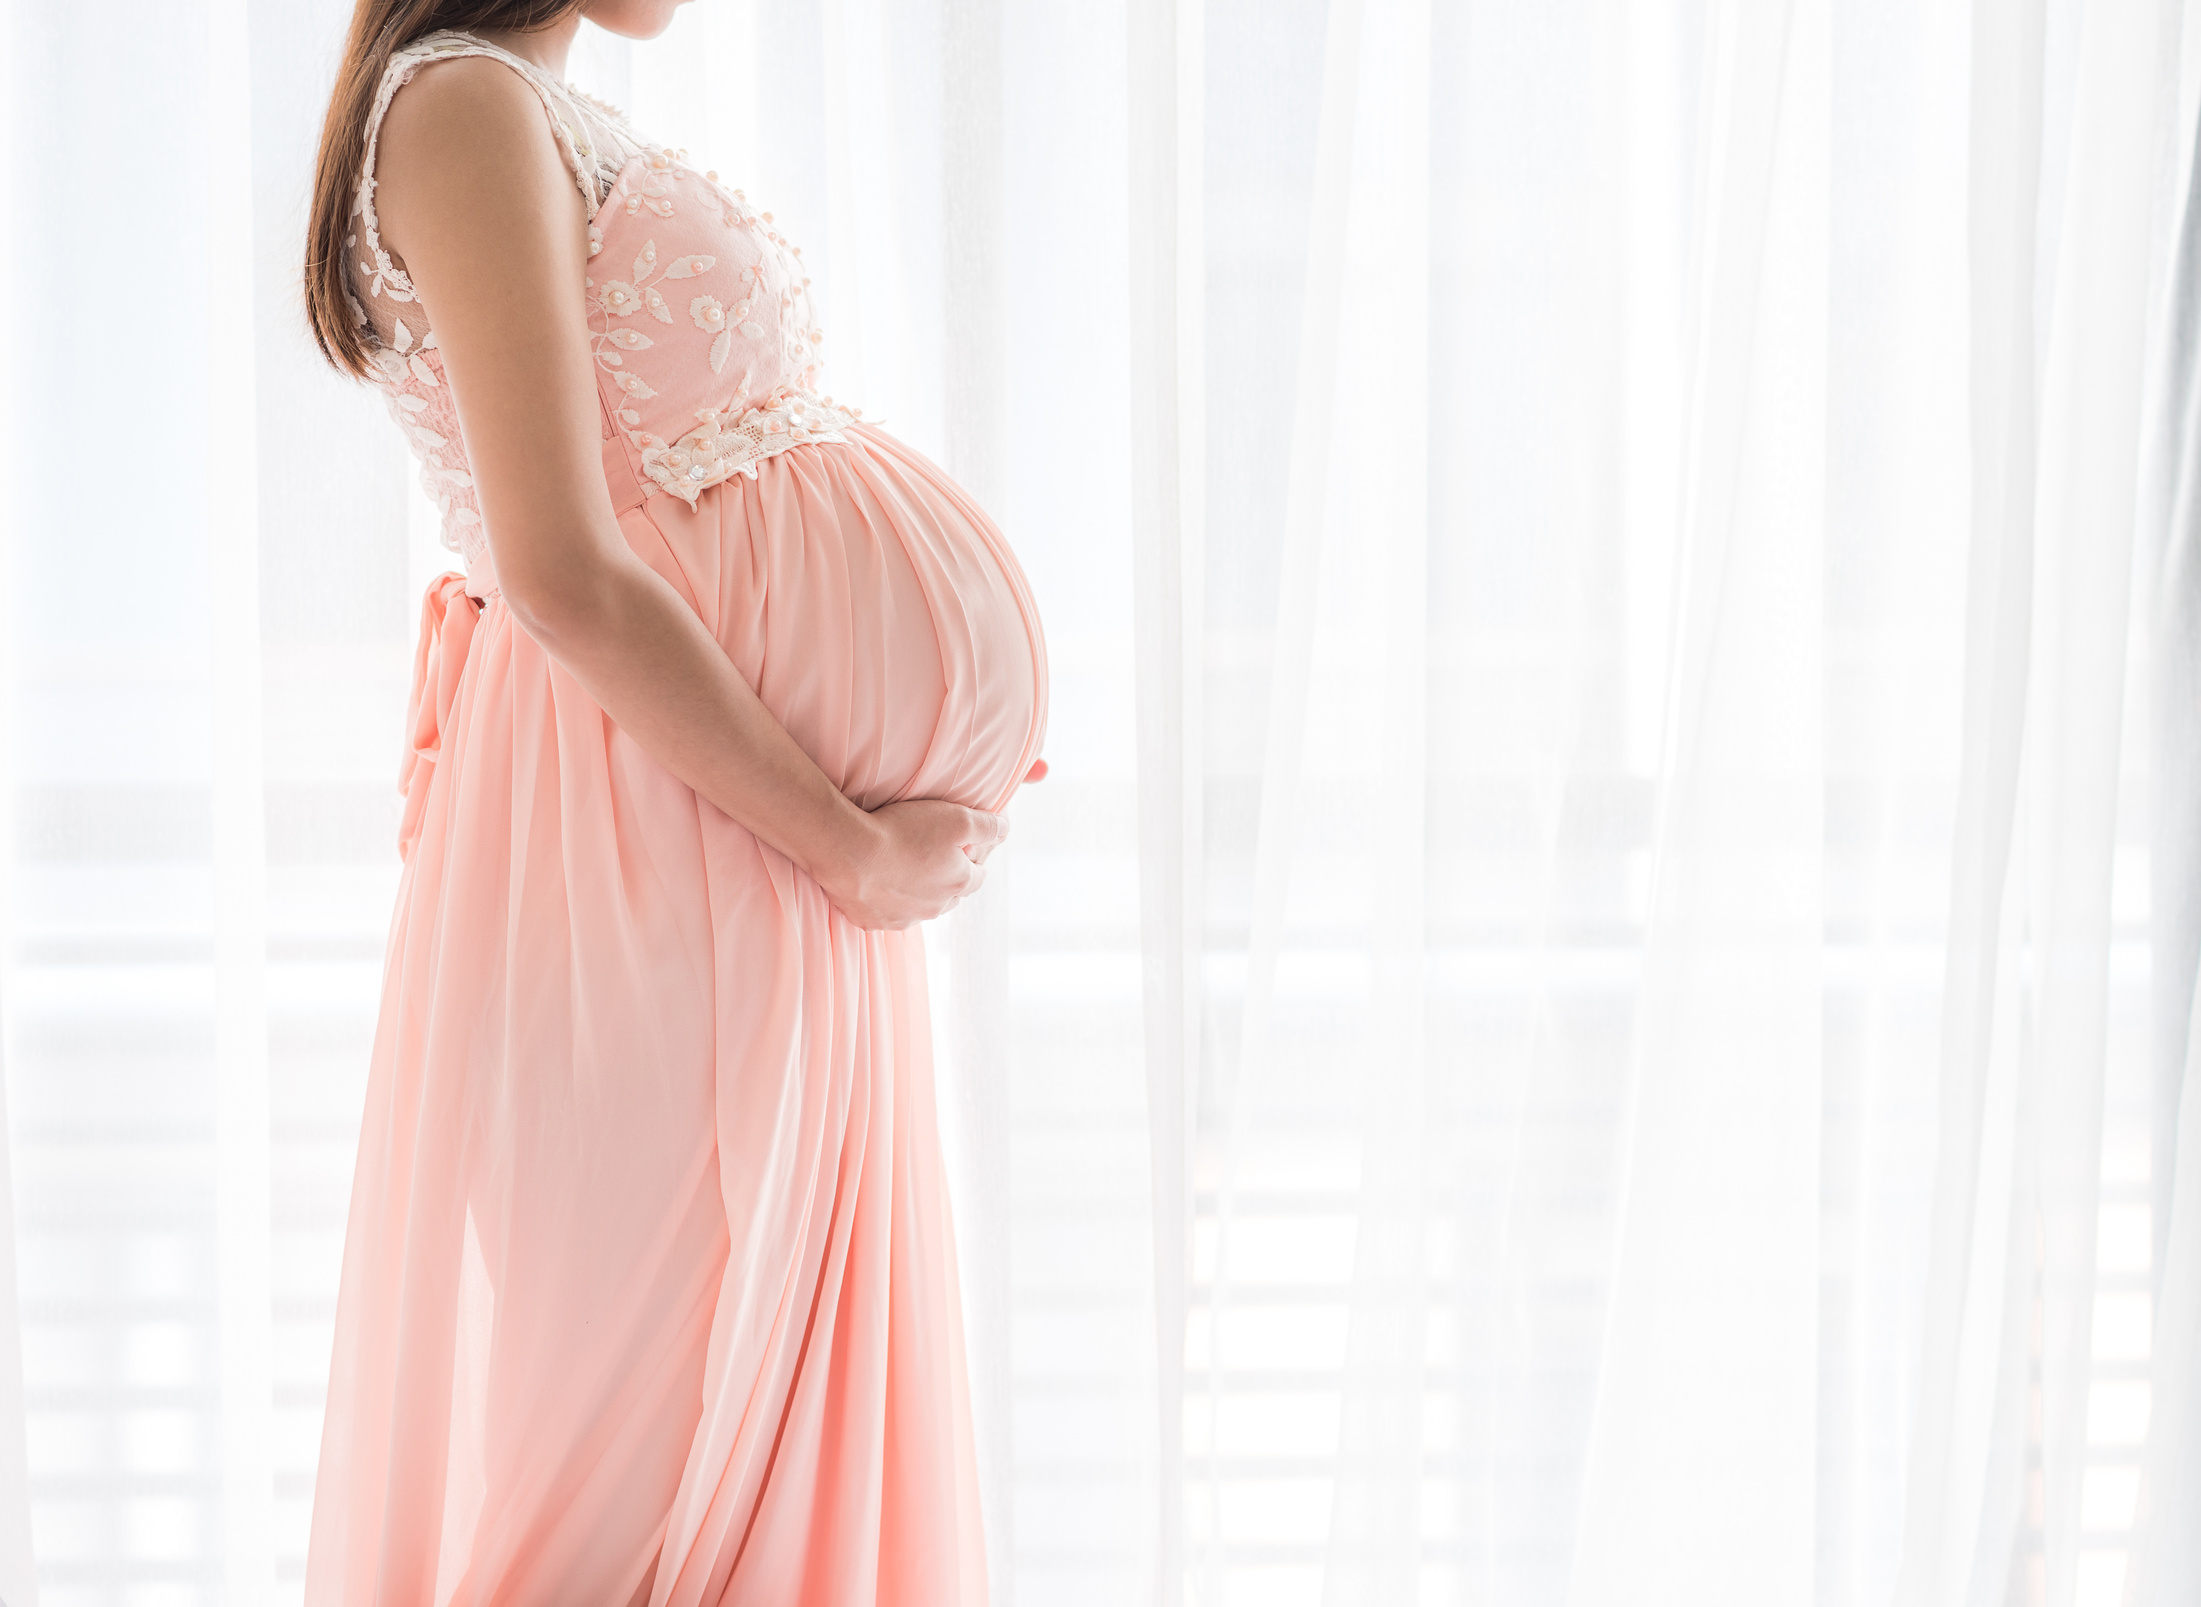 Pregnant Woman Wearing Pink Dress Standing by the Curtain